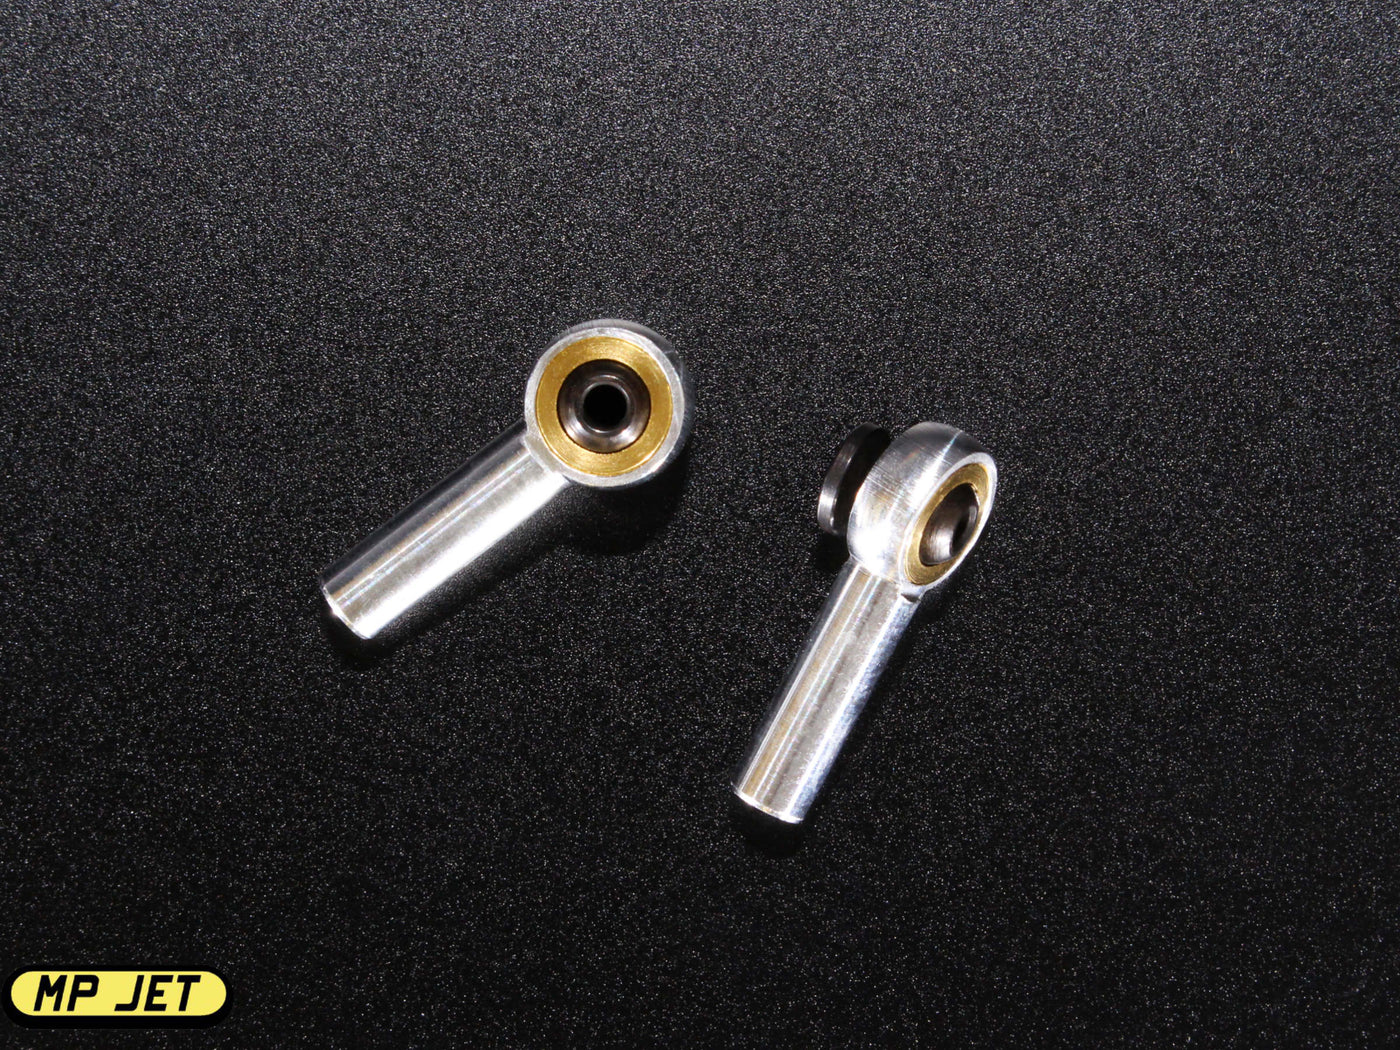 MP Jet Ball Link V3 / 5mm ball with Offset Flange and 2mm hole / M2